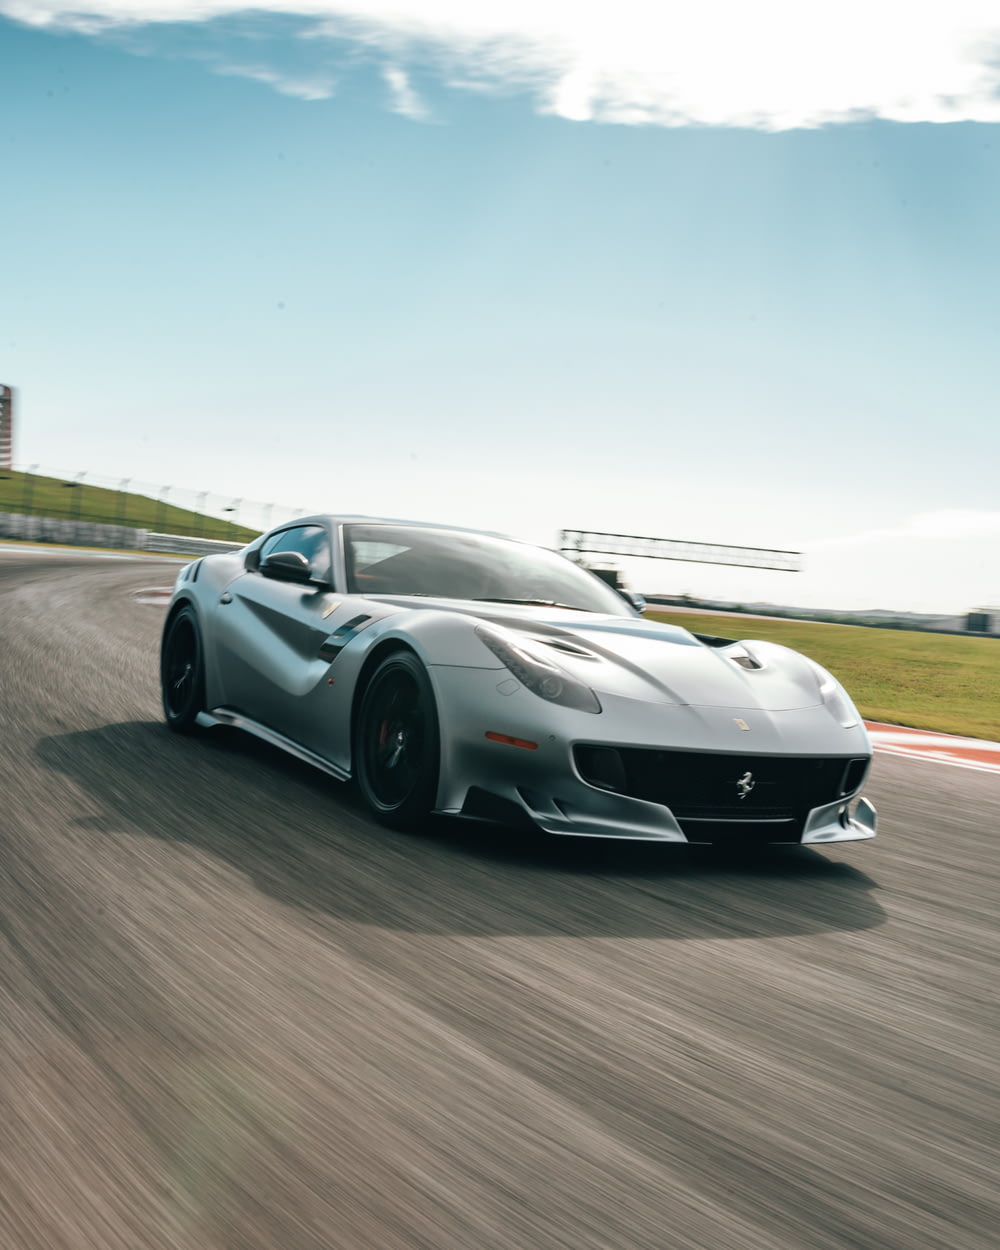 silver Ferrari coupe passing on road during daytime screenshot